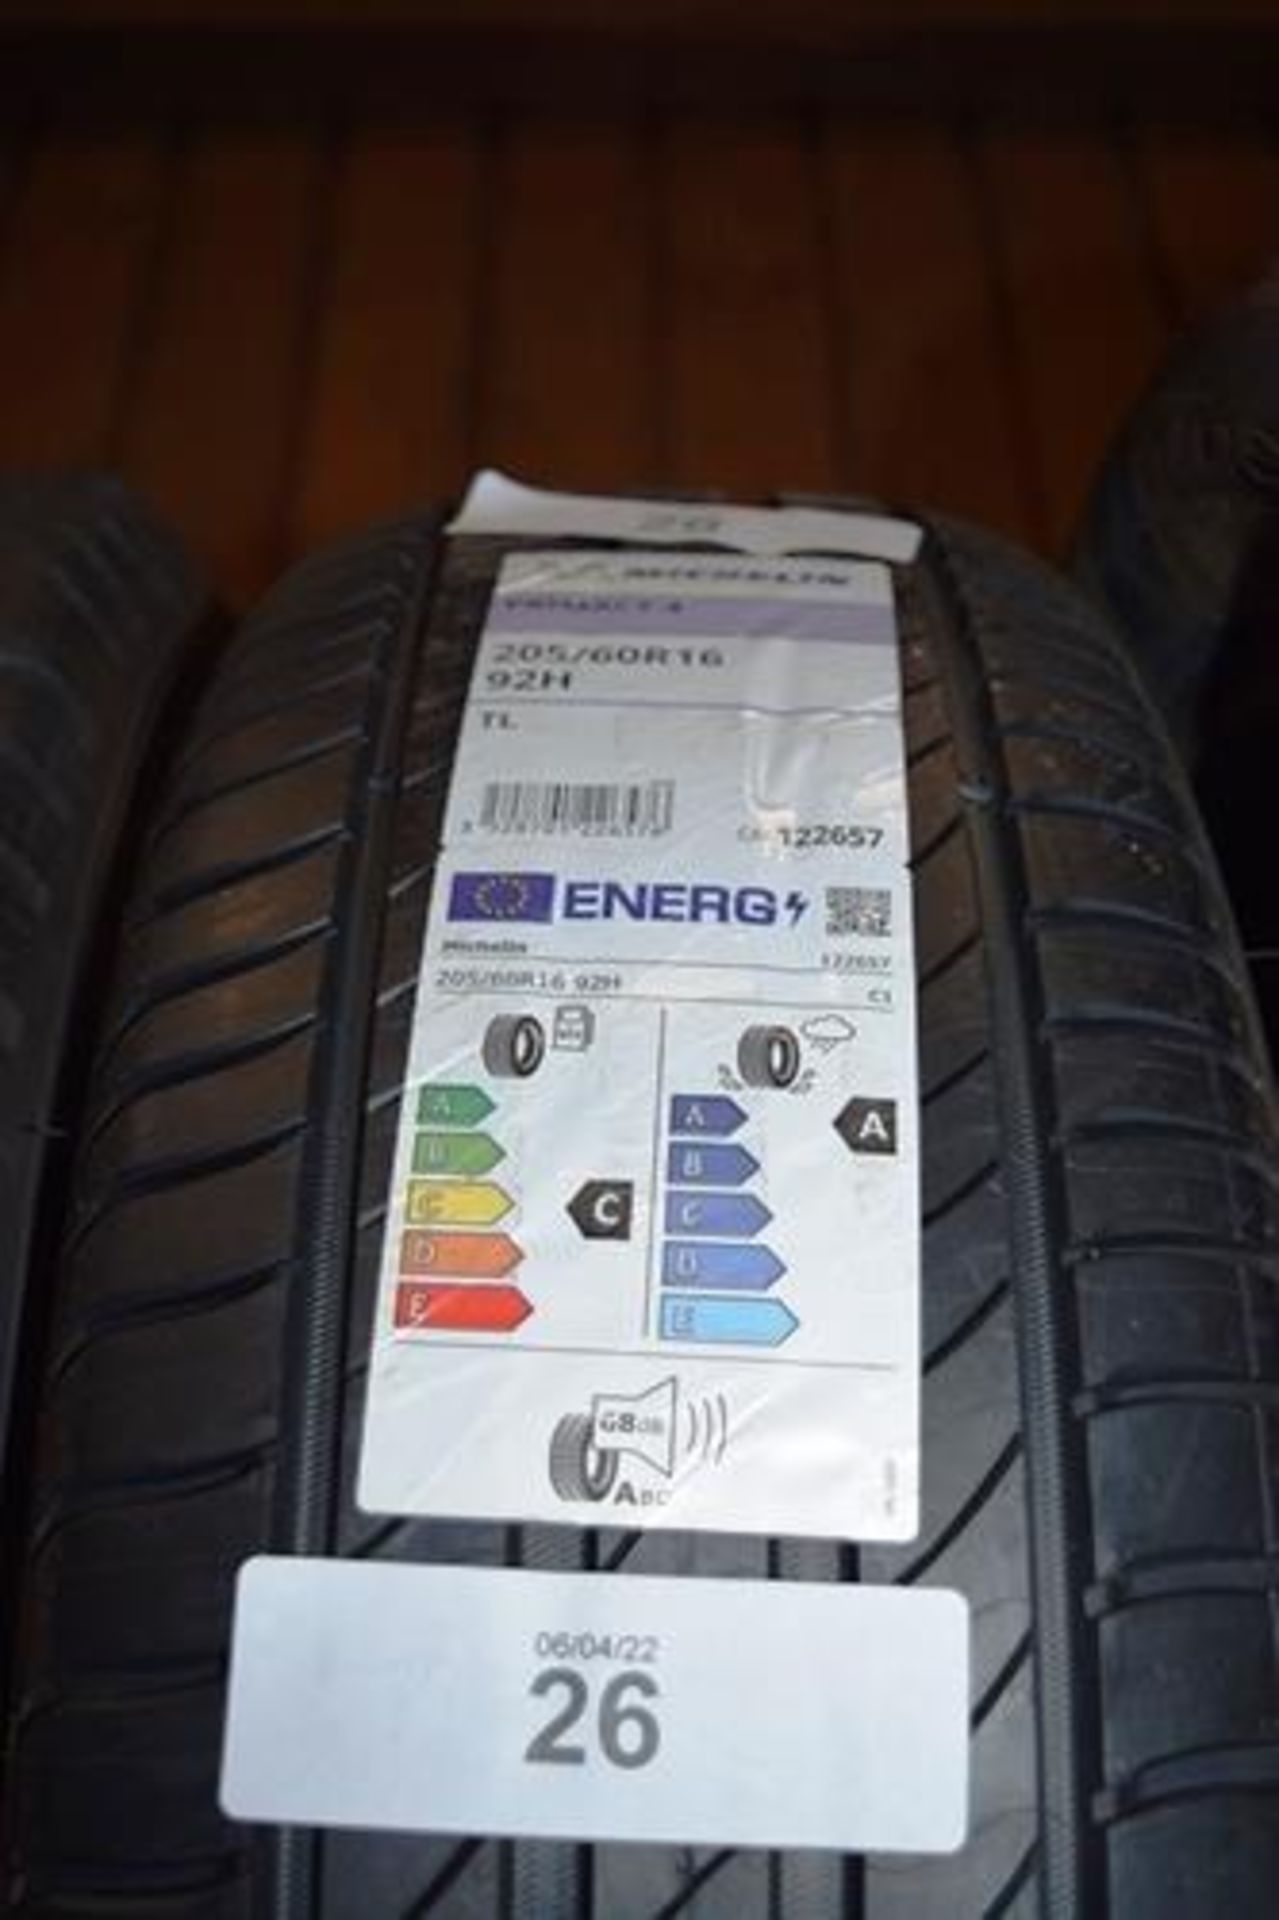 1 x Michelin Primacy 4 tyre, size 205/60R16 92H TL - New with label (GS4)